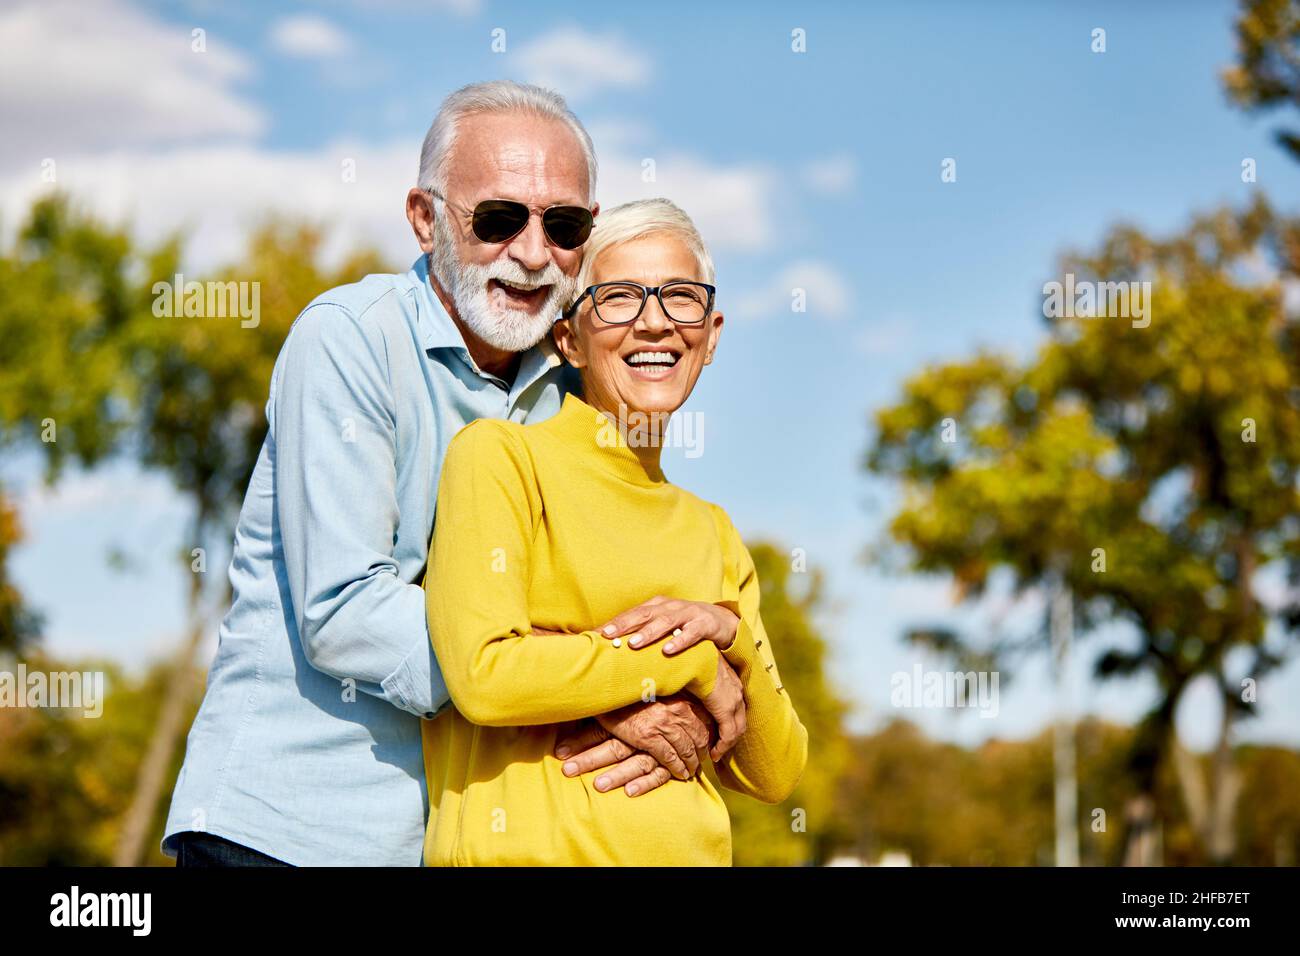 senior couple happy elderly love together cheerful smiling portrait holding hands woman retirement man Stock Photo